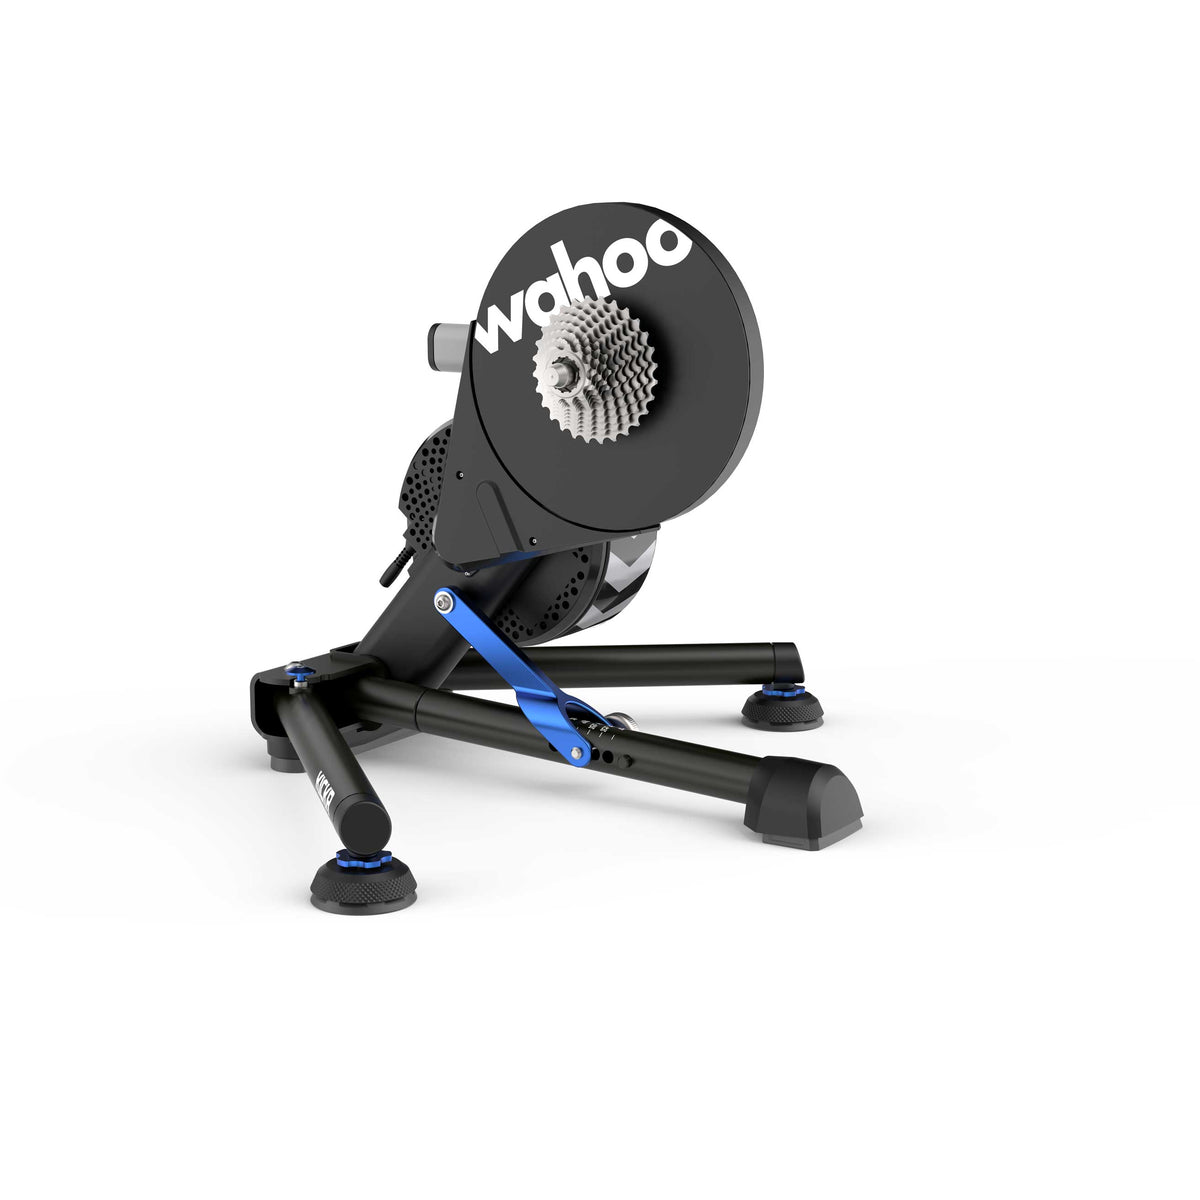 Wahoo Fitness Products Overview — A Look at the Complete Range